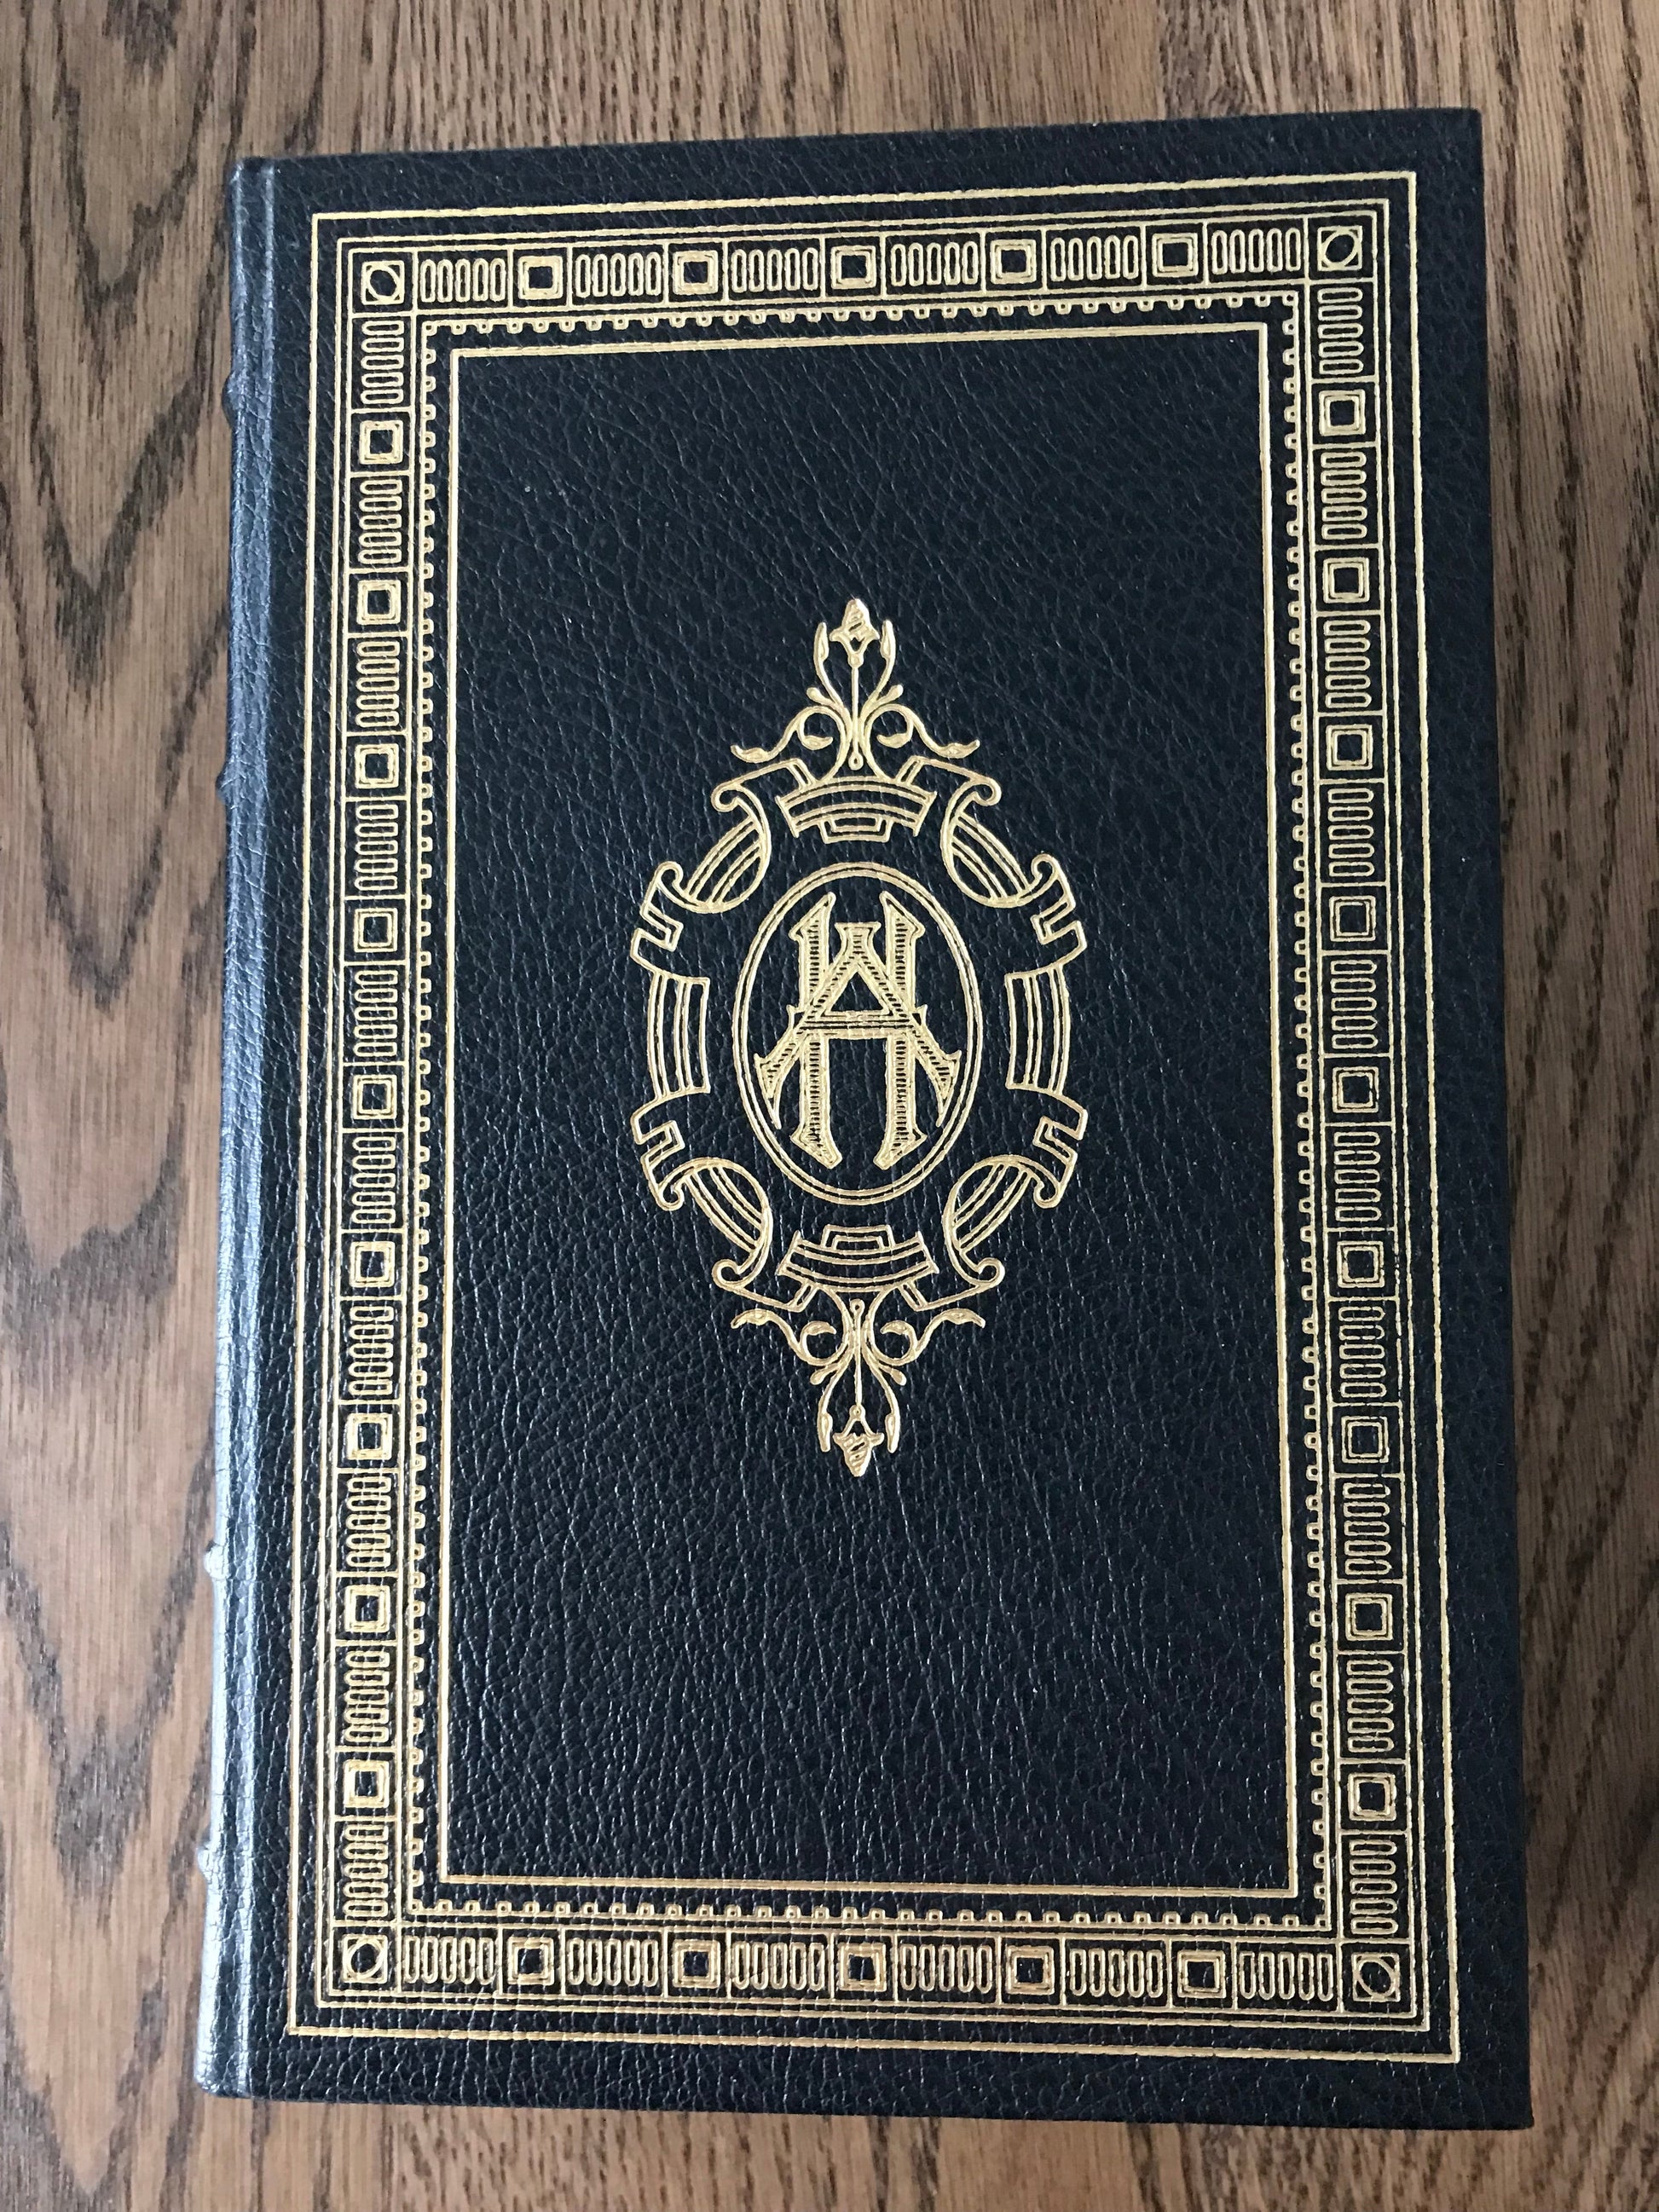 THE EDUCATION OF HENRY ADAMS - BY HENRY ADAMS BooksCardsNBikes